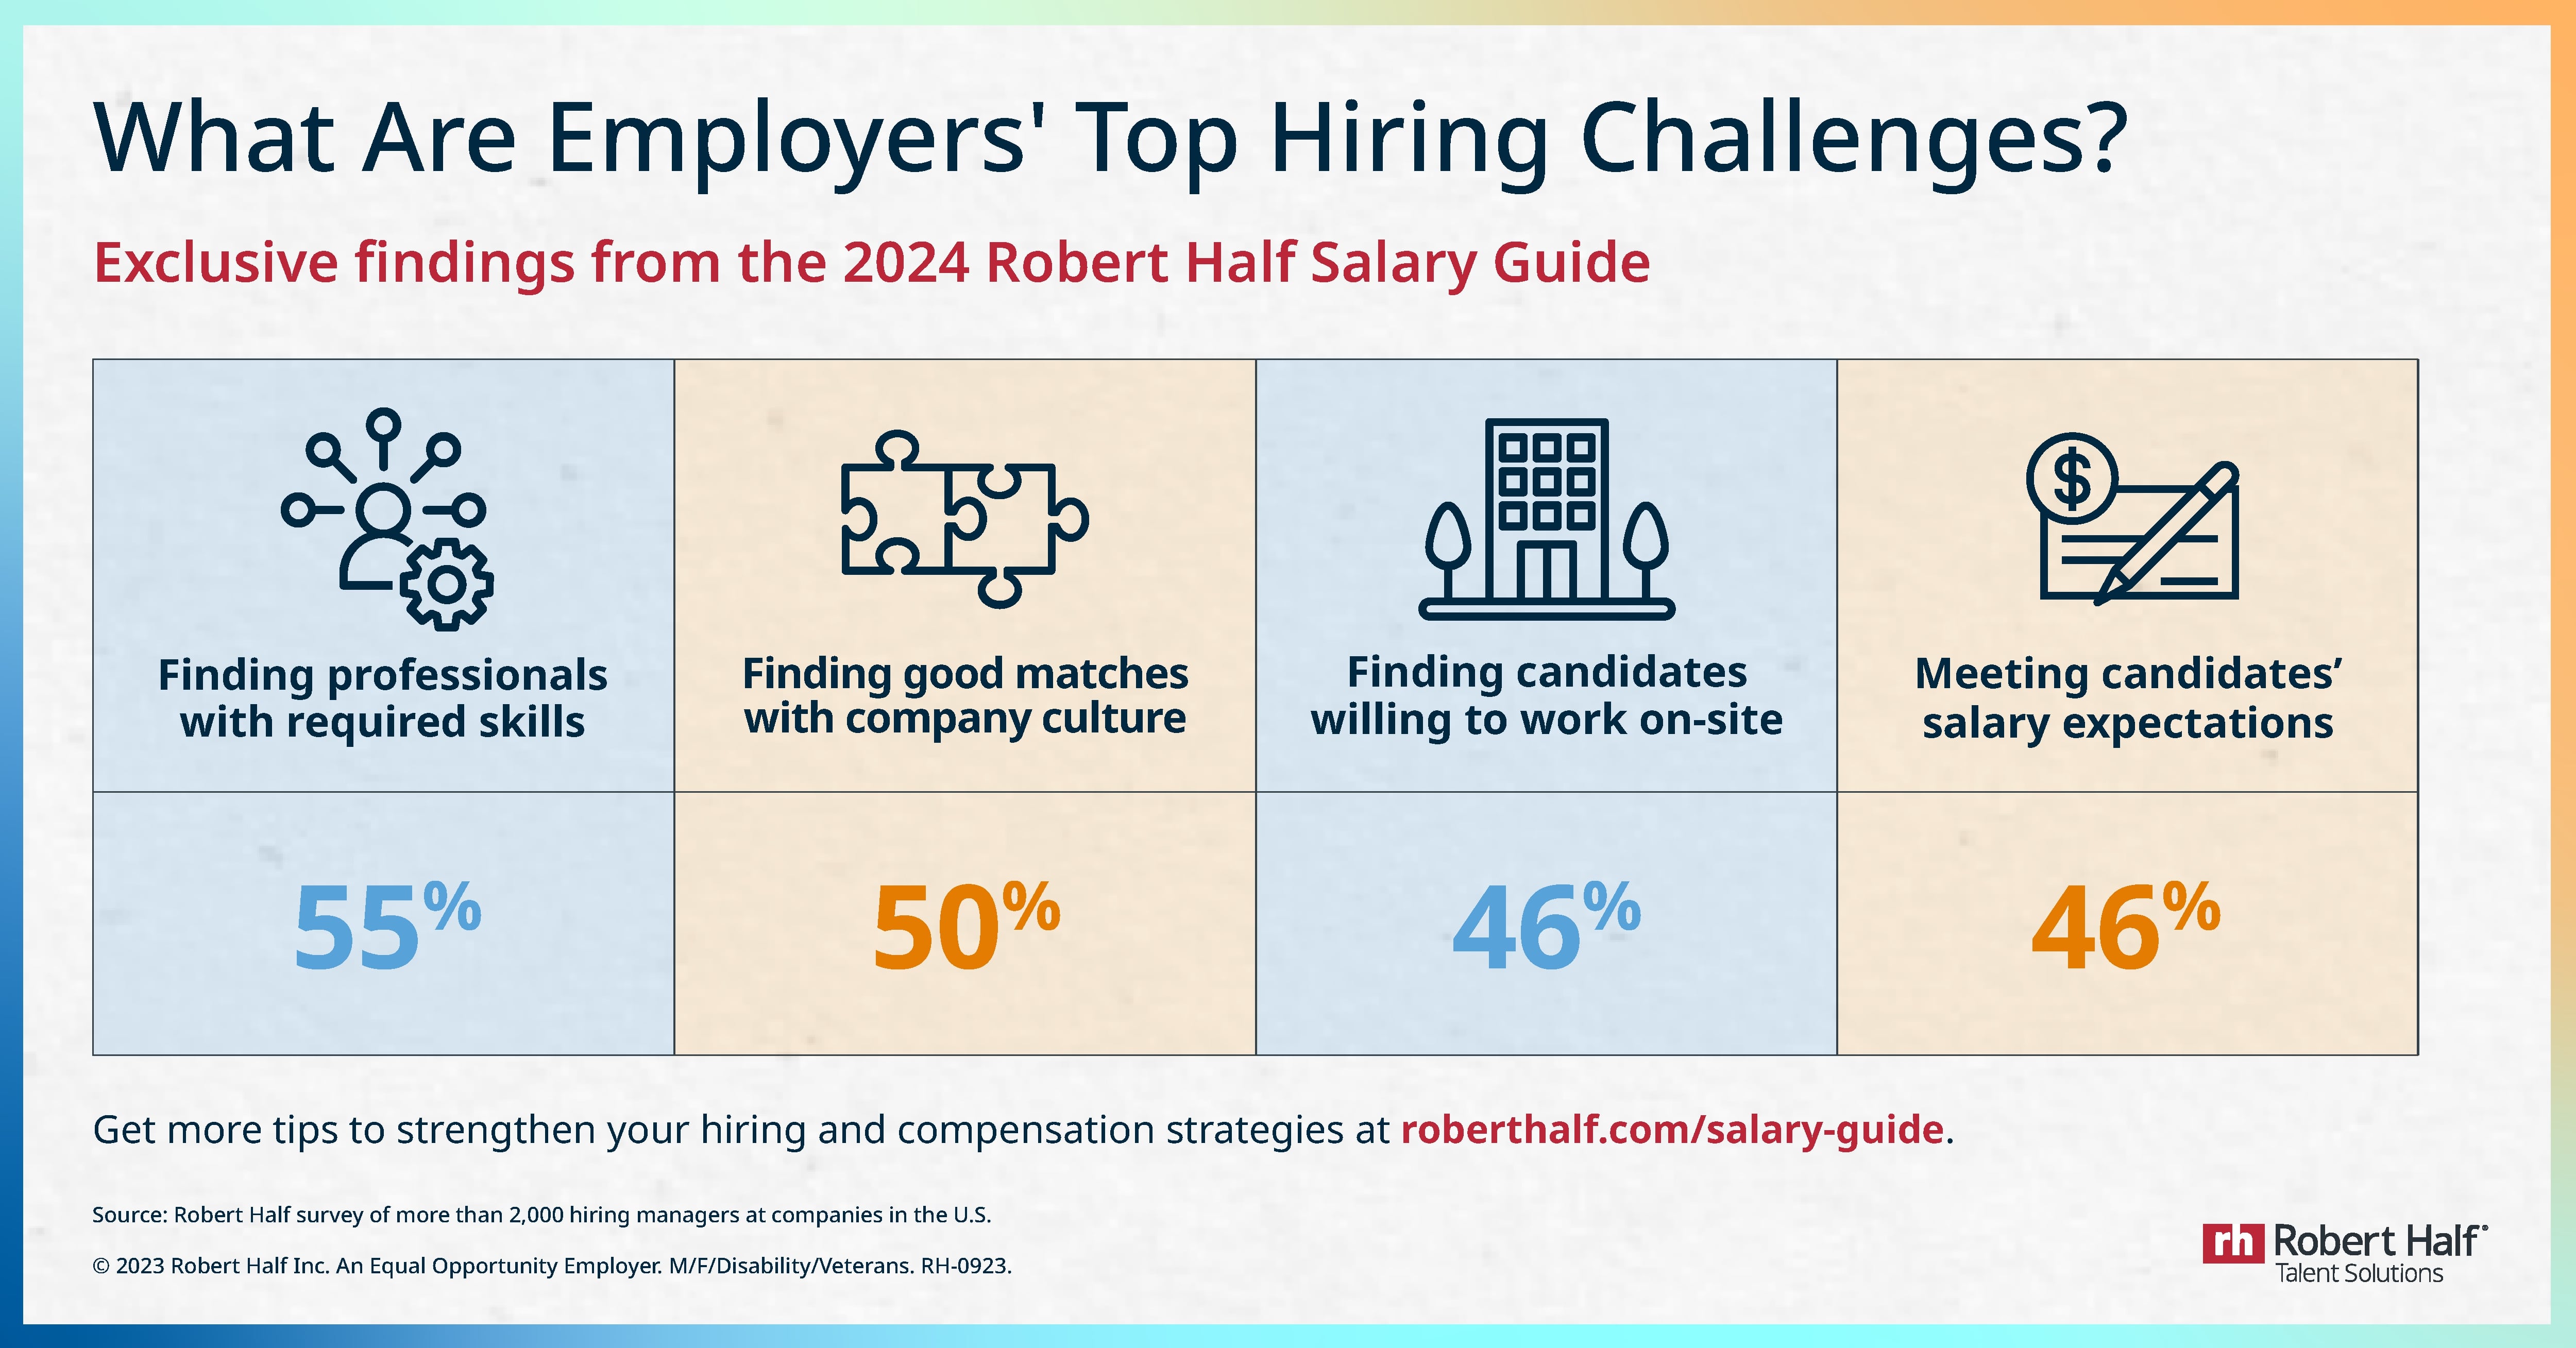 What are employers' top hiring challenges?